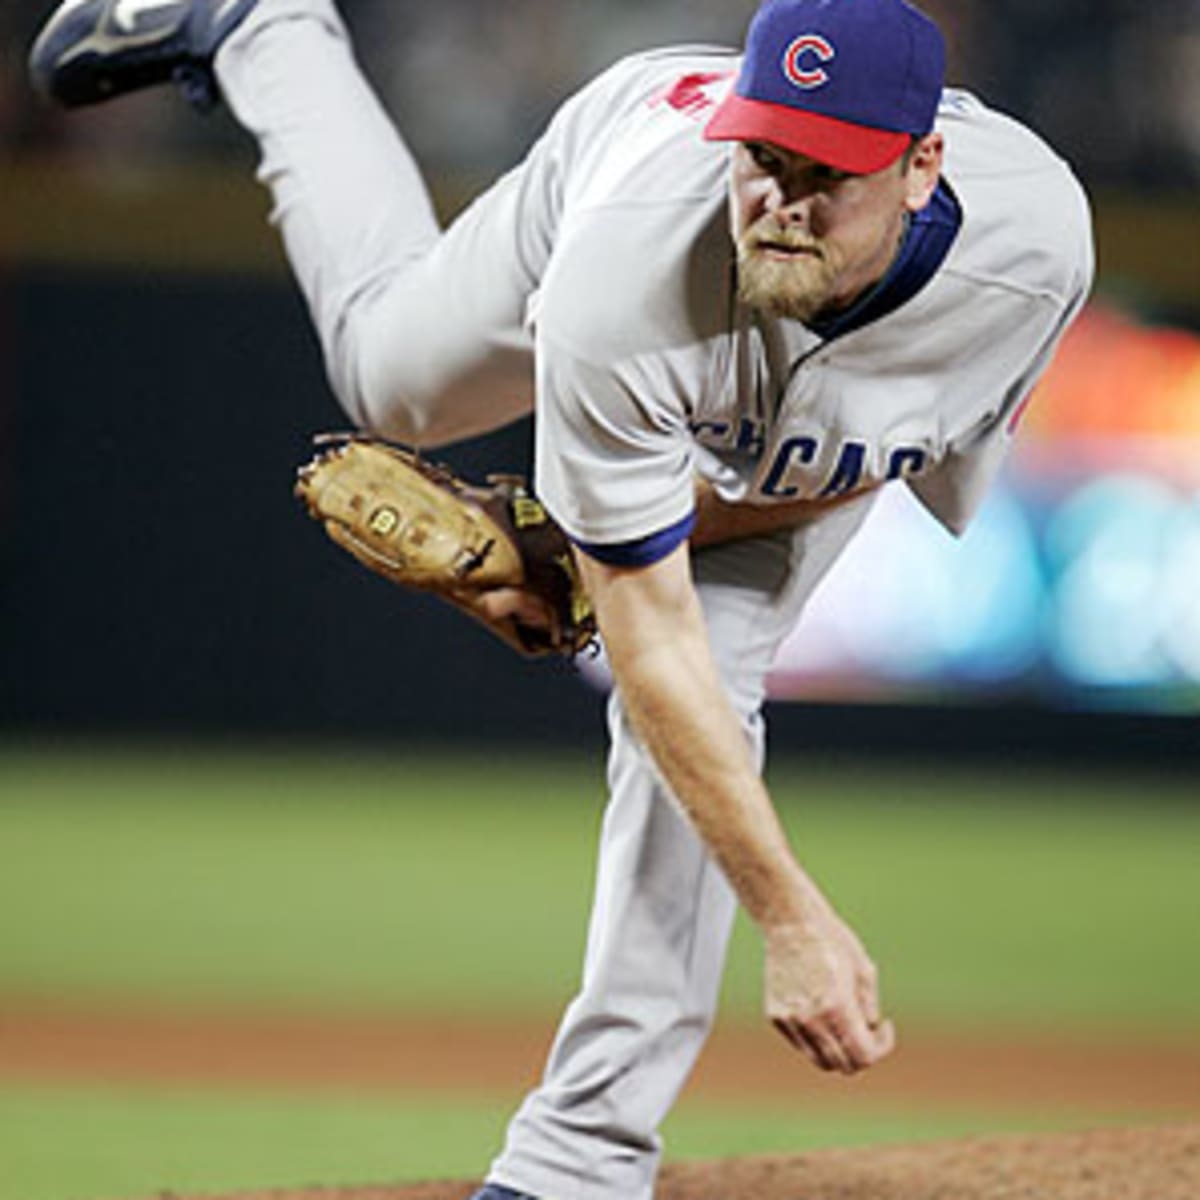 Kerry Wood returning to Cubs - Sports Illustrated